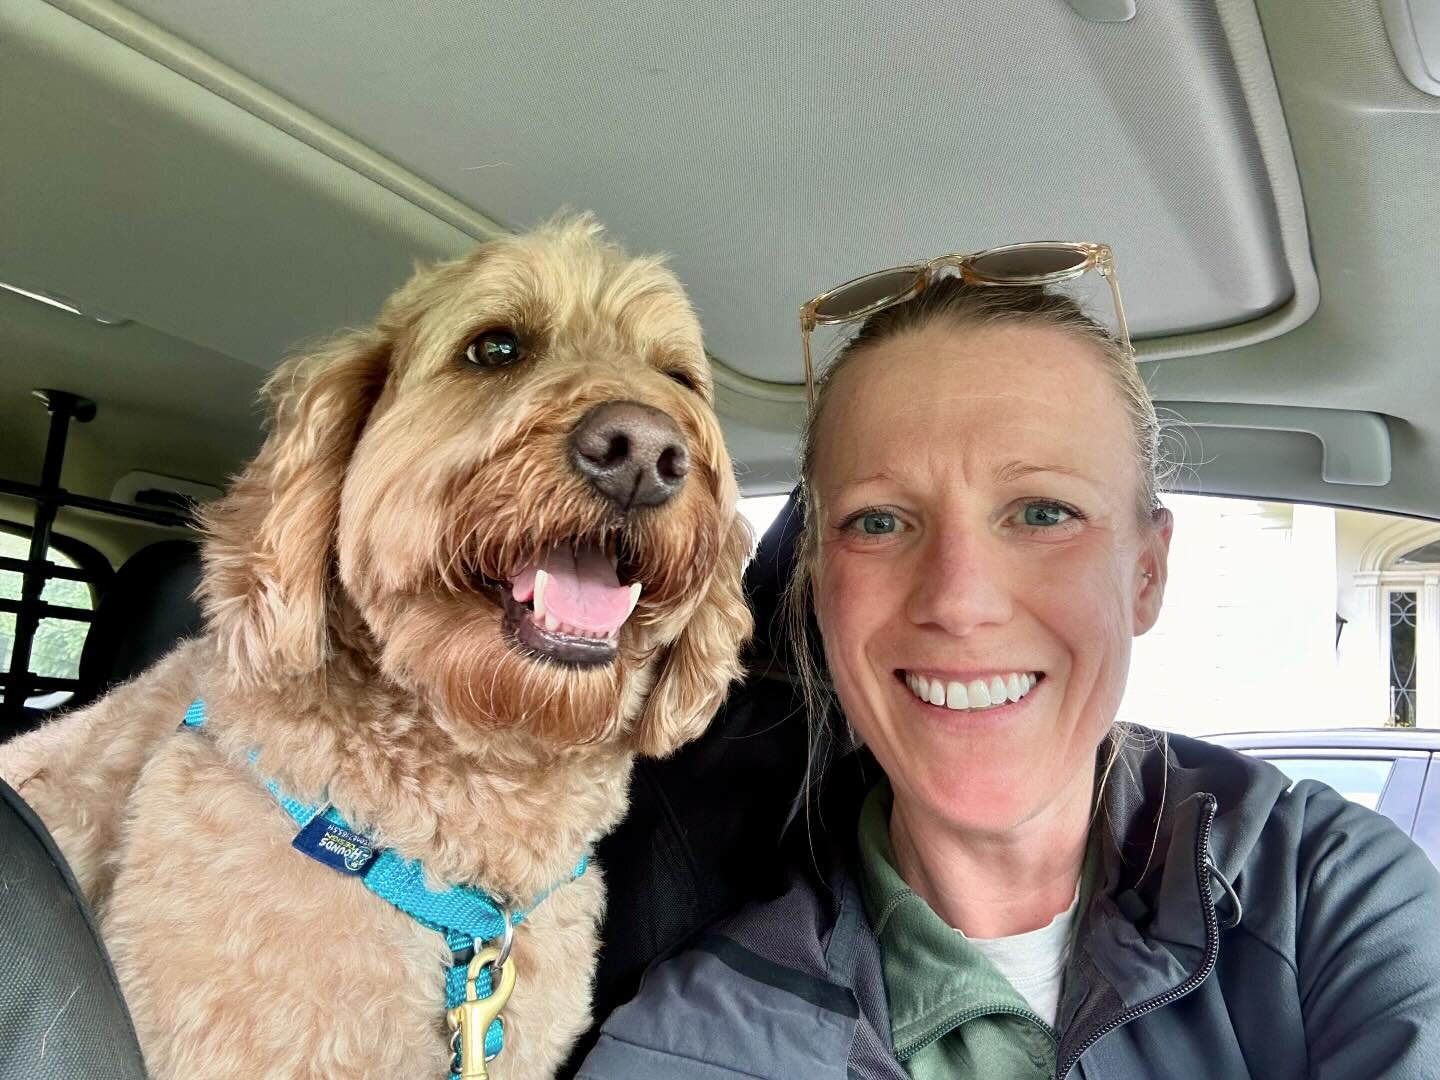 Happy Monday! I can&rsquo;t wait to see my  pups!#marincanineadventures #doglife #happy-dog #dogsofinsta #dogsofinstagram #dogohotography #marindogs #traildogs #hikewithdogs #goldendoodle #goldendoodles #goldendoodlesofinstagram